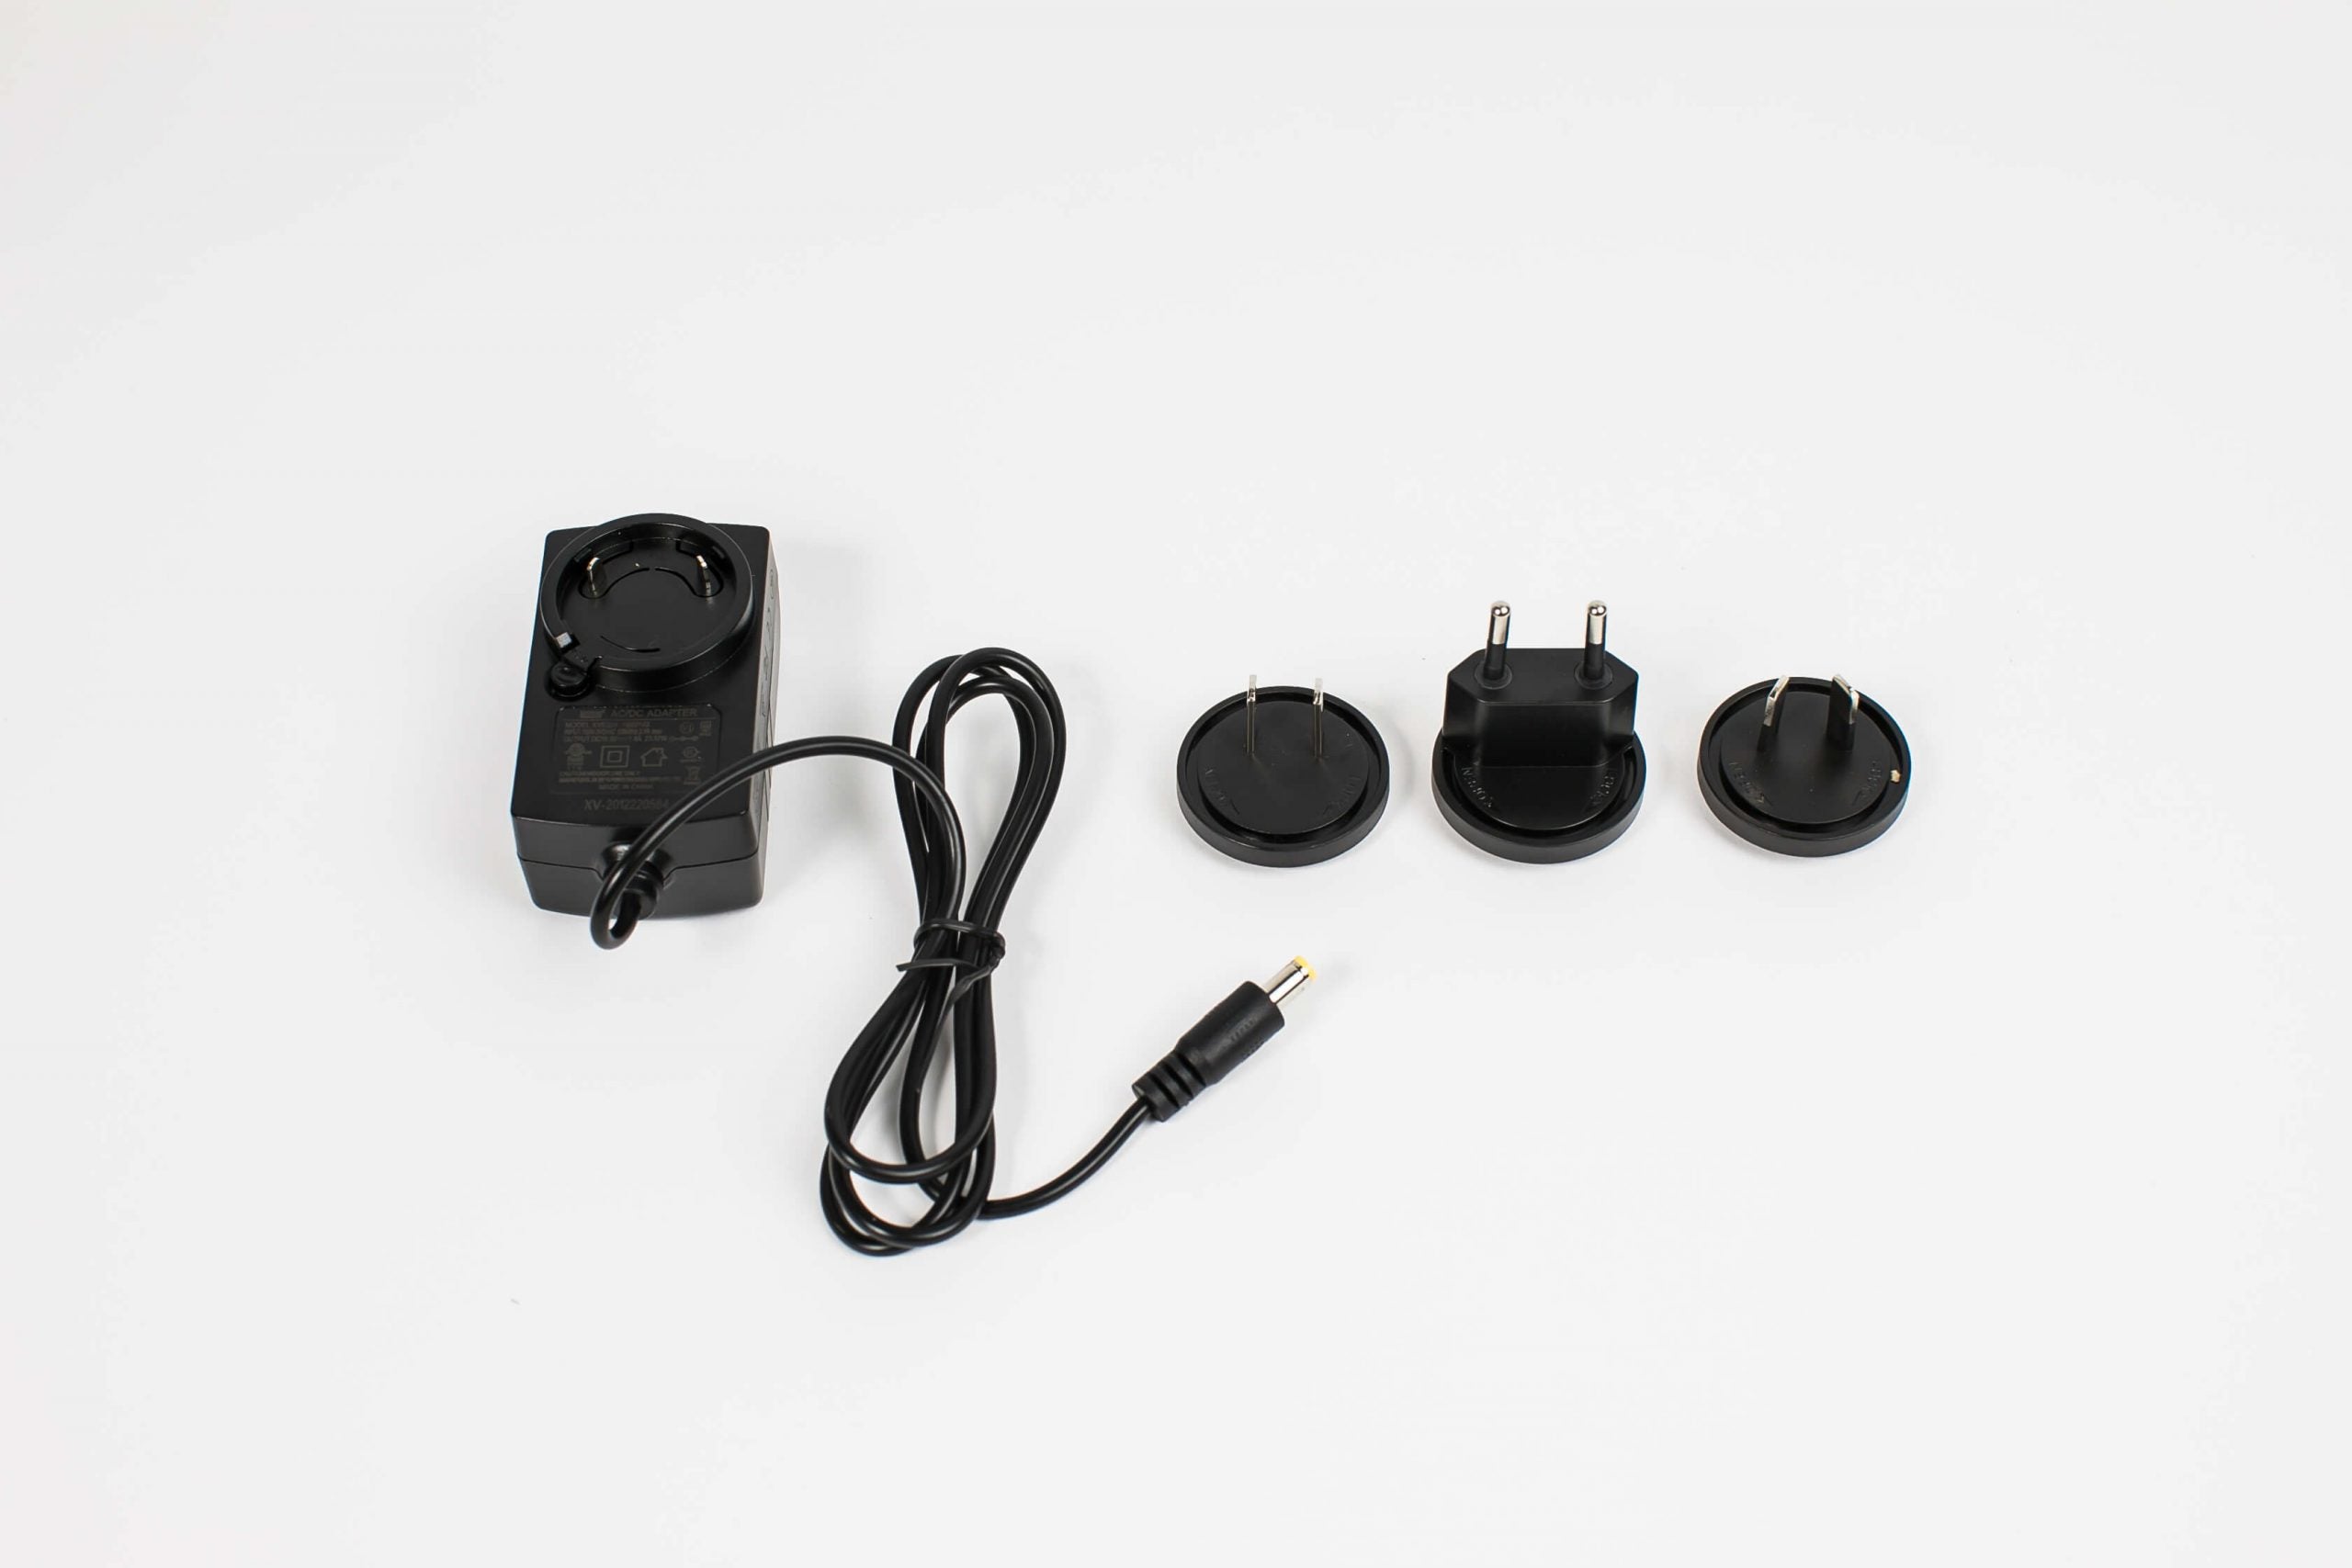 Nemo GRABO Classic - The electric suction cup - GRABO Multi socket Charger